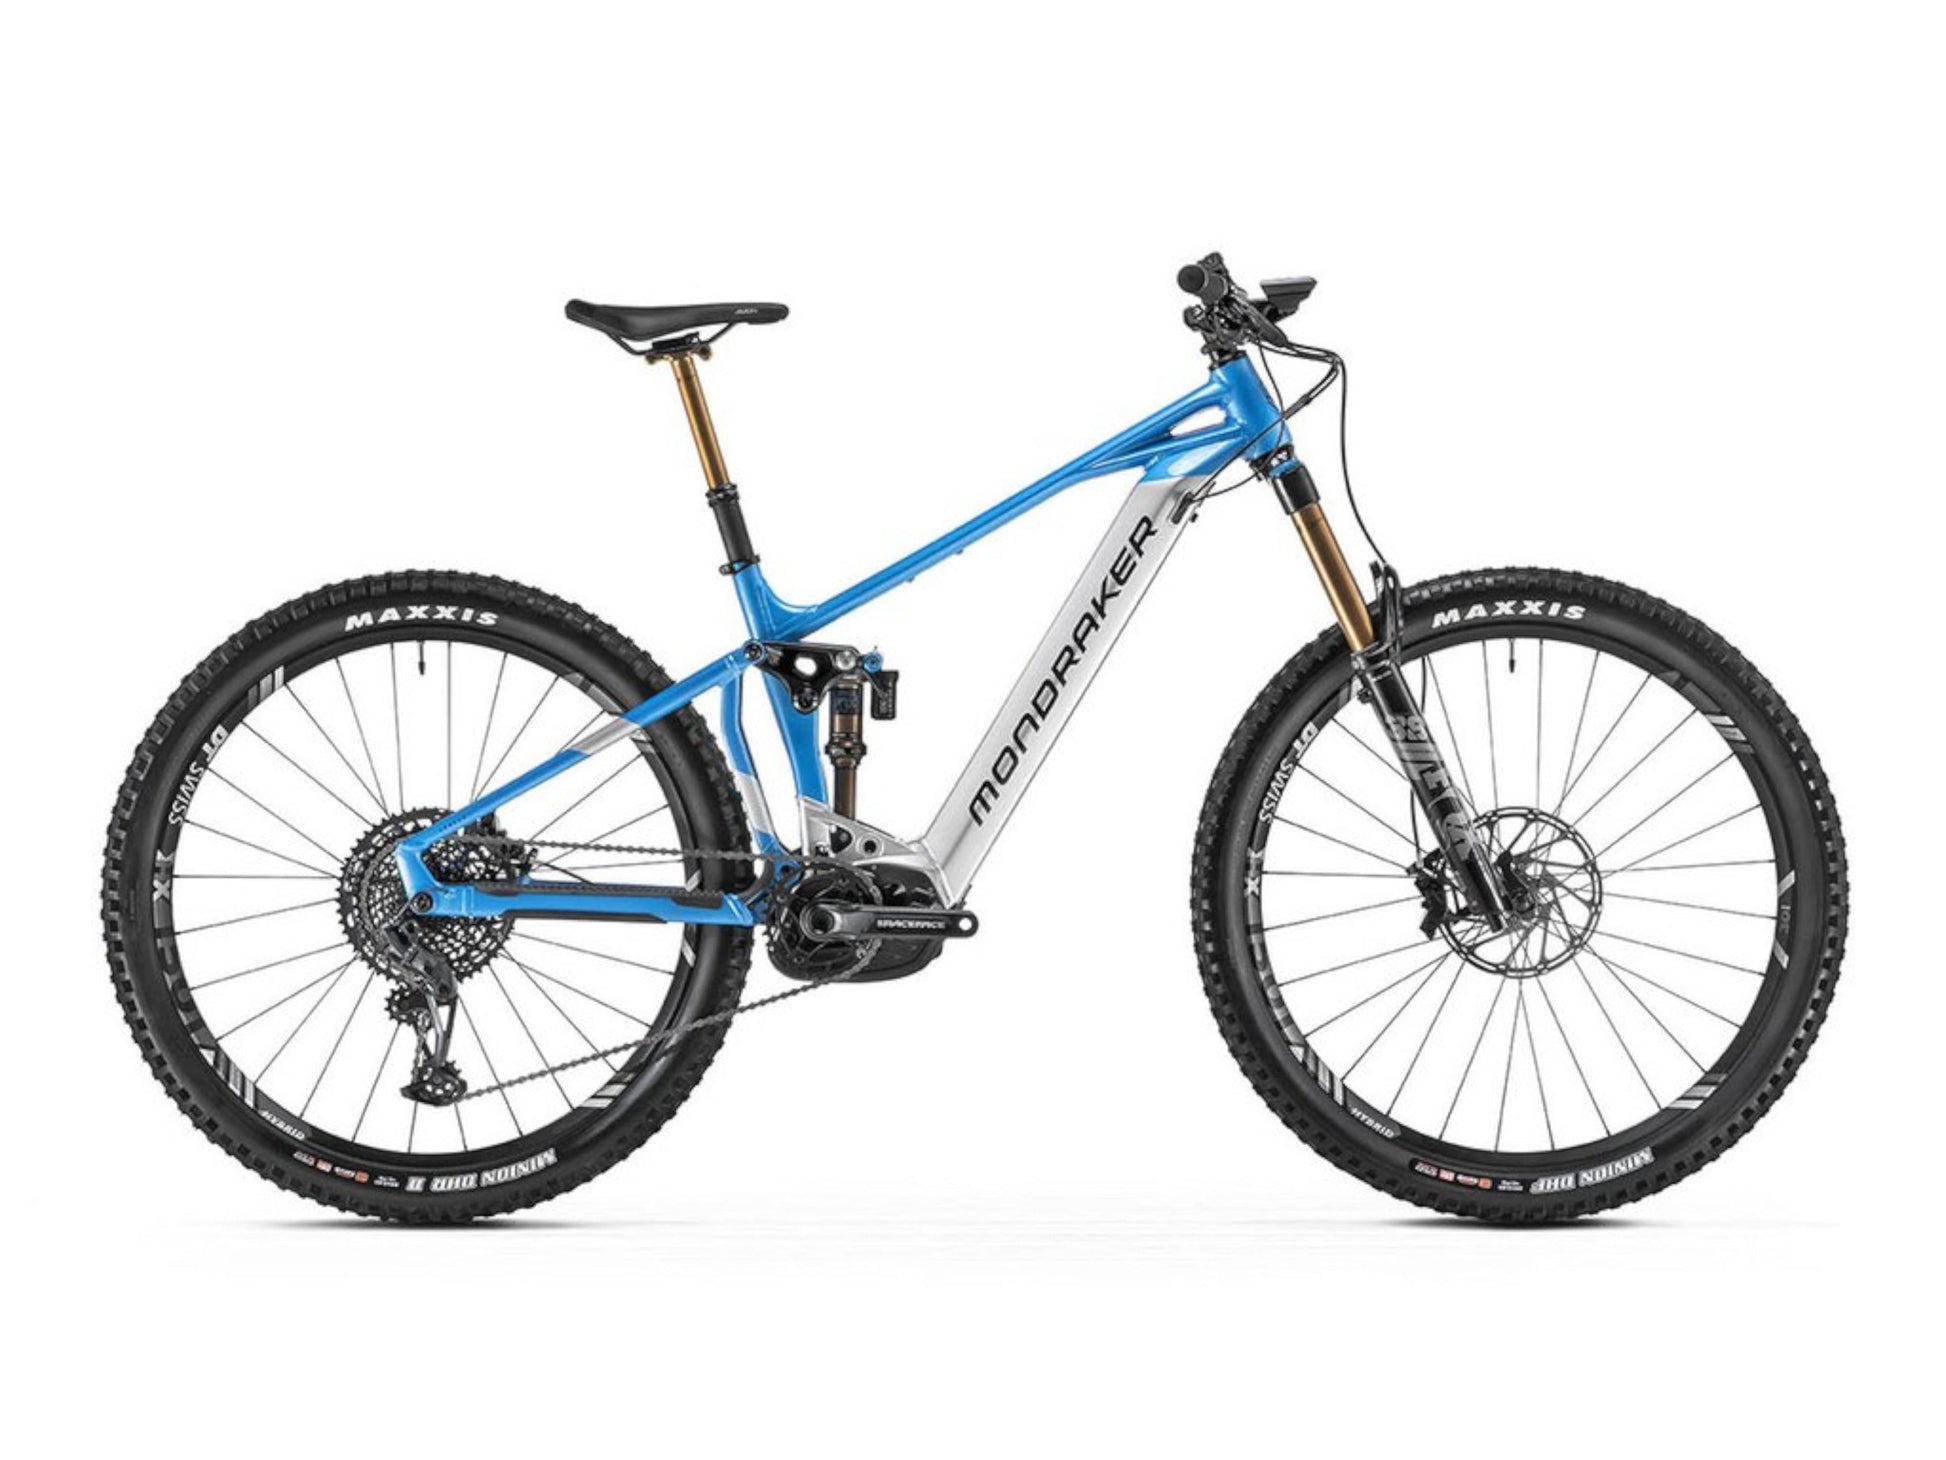 Mondraker Crafty RR electric mountain bike Marlin Blue and Racing Silver profile white background on Fly Rides